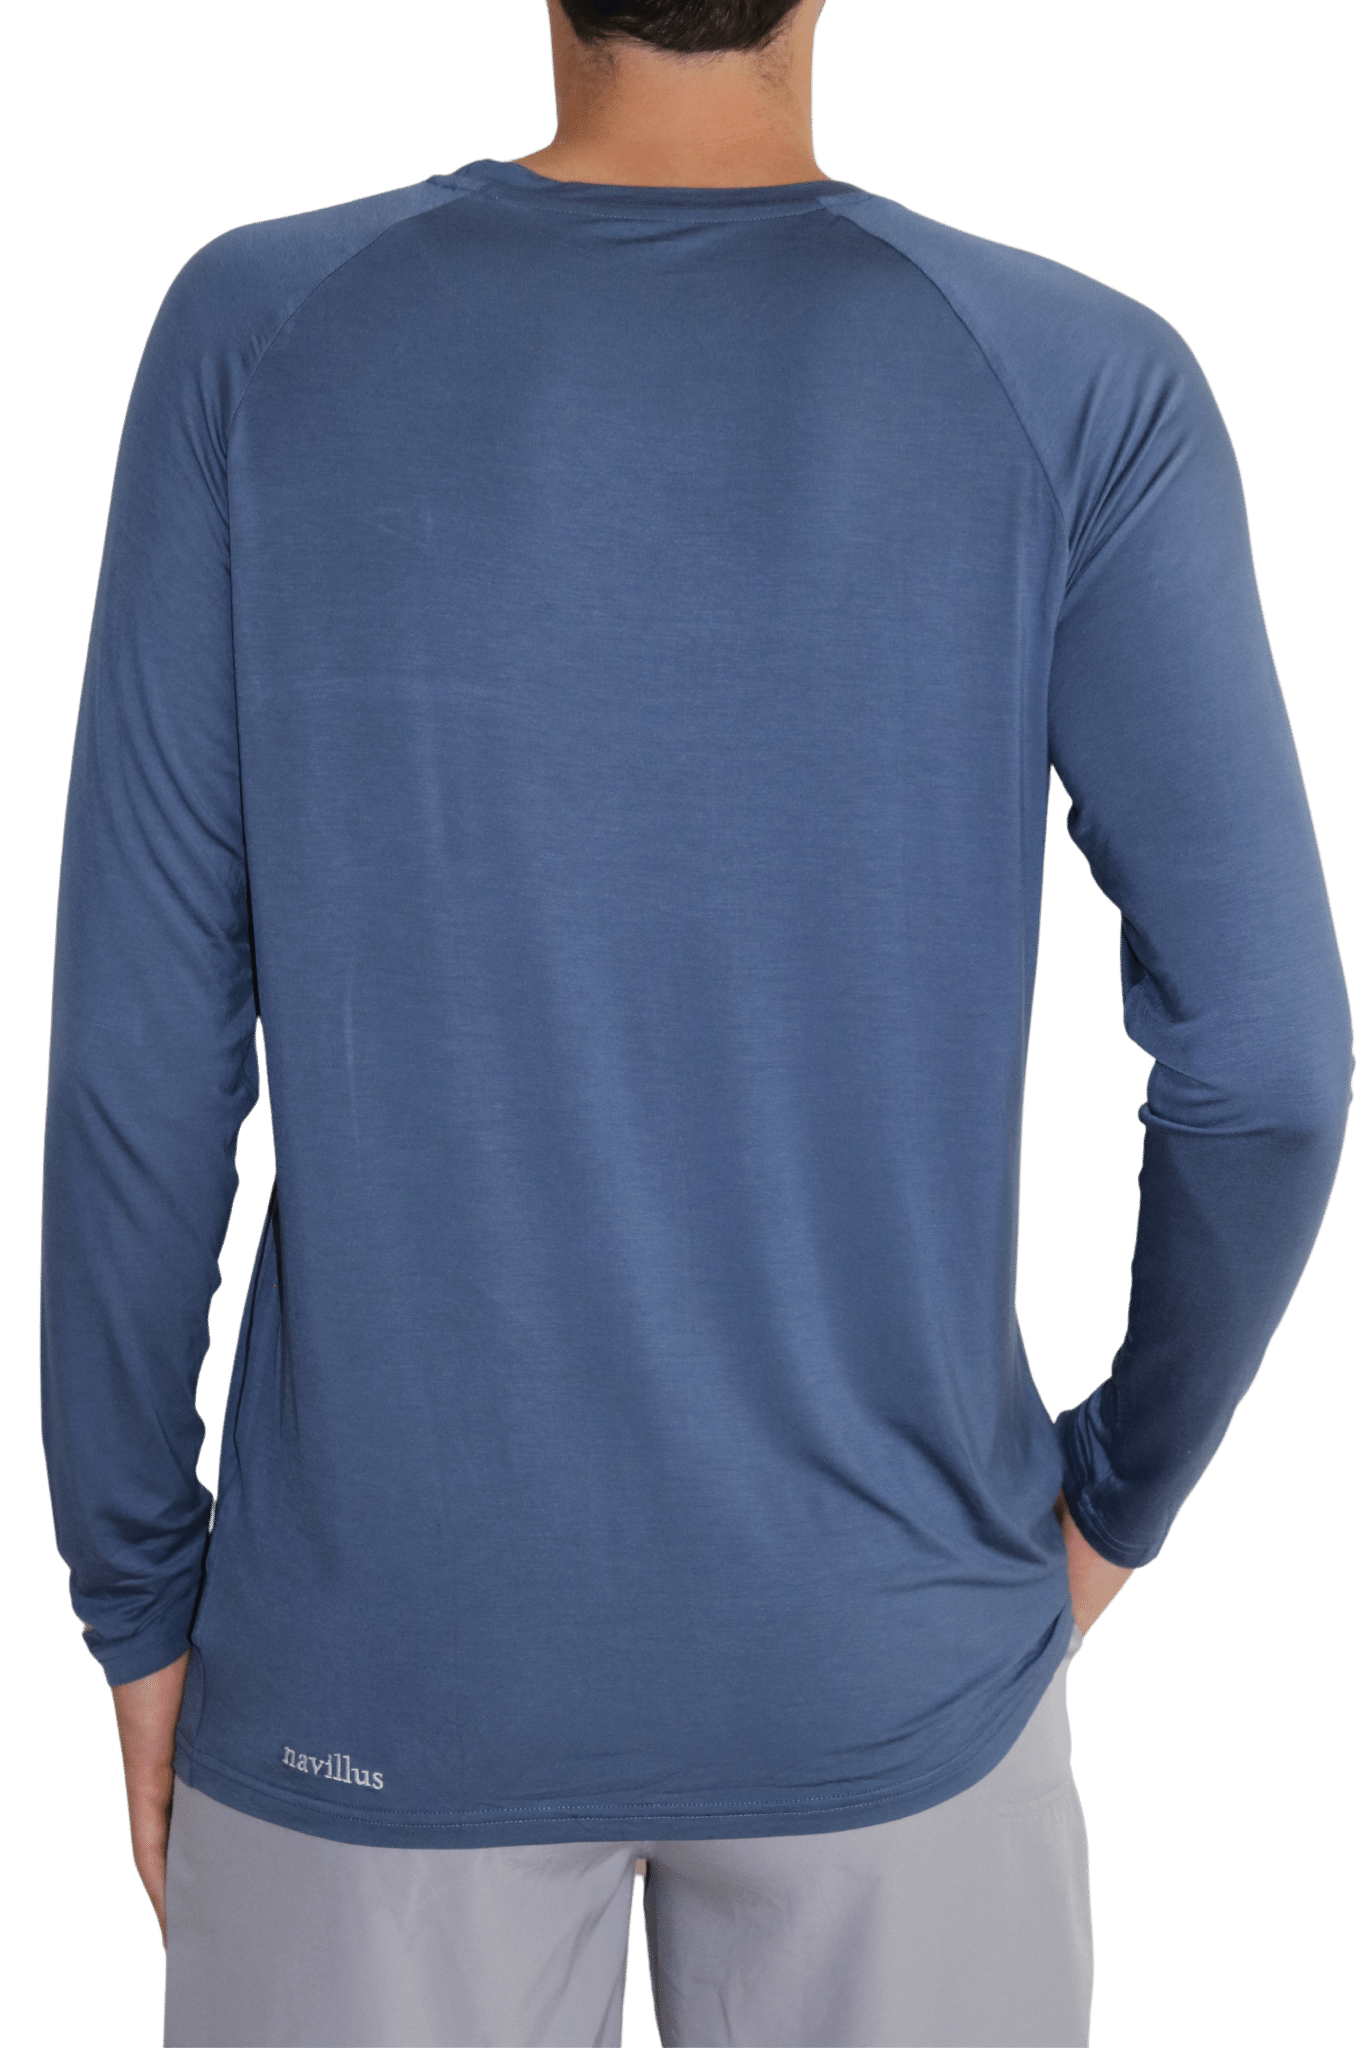 Back of the navy icon long sleeve bamboo shirt with 35+ UPF sun protection.